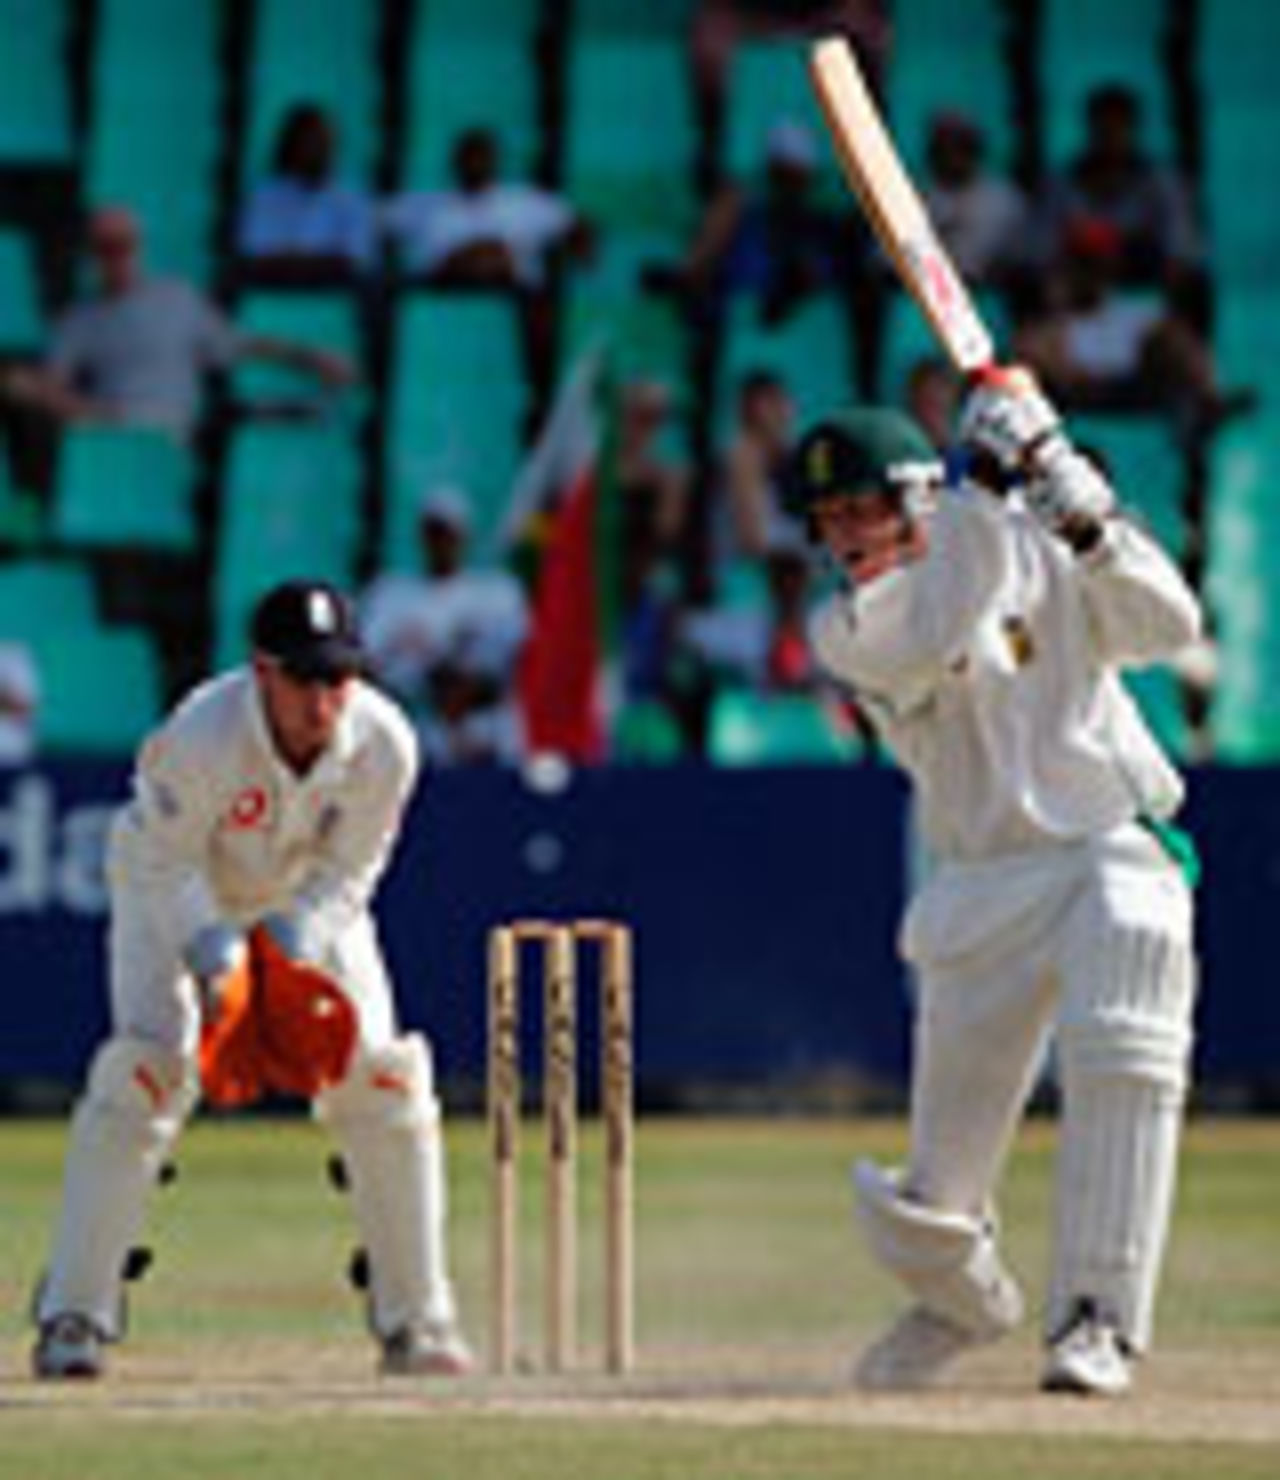 Shaun Pollock drives, South Africa v England, 2nd Test, Durban, 5th day, December 30 2004